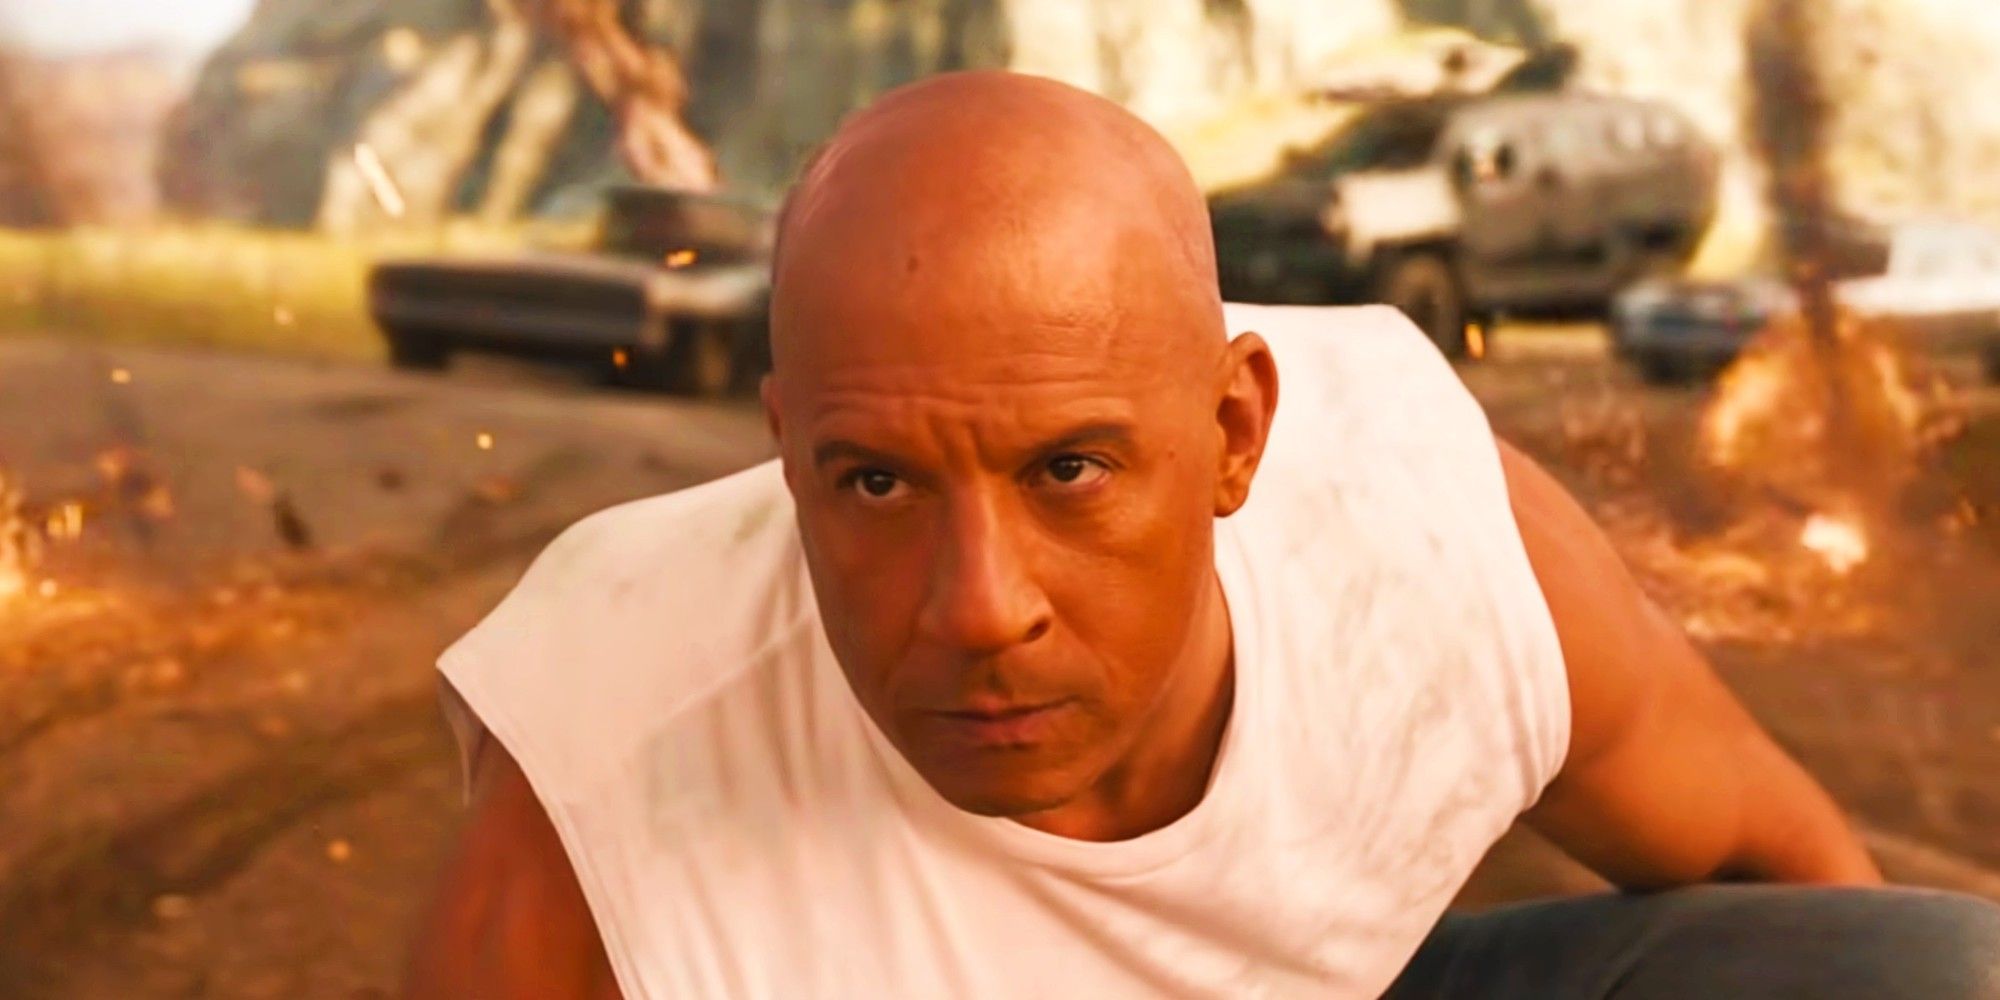 Vin Diesel in Fast and Furious 9 F9